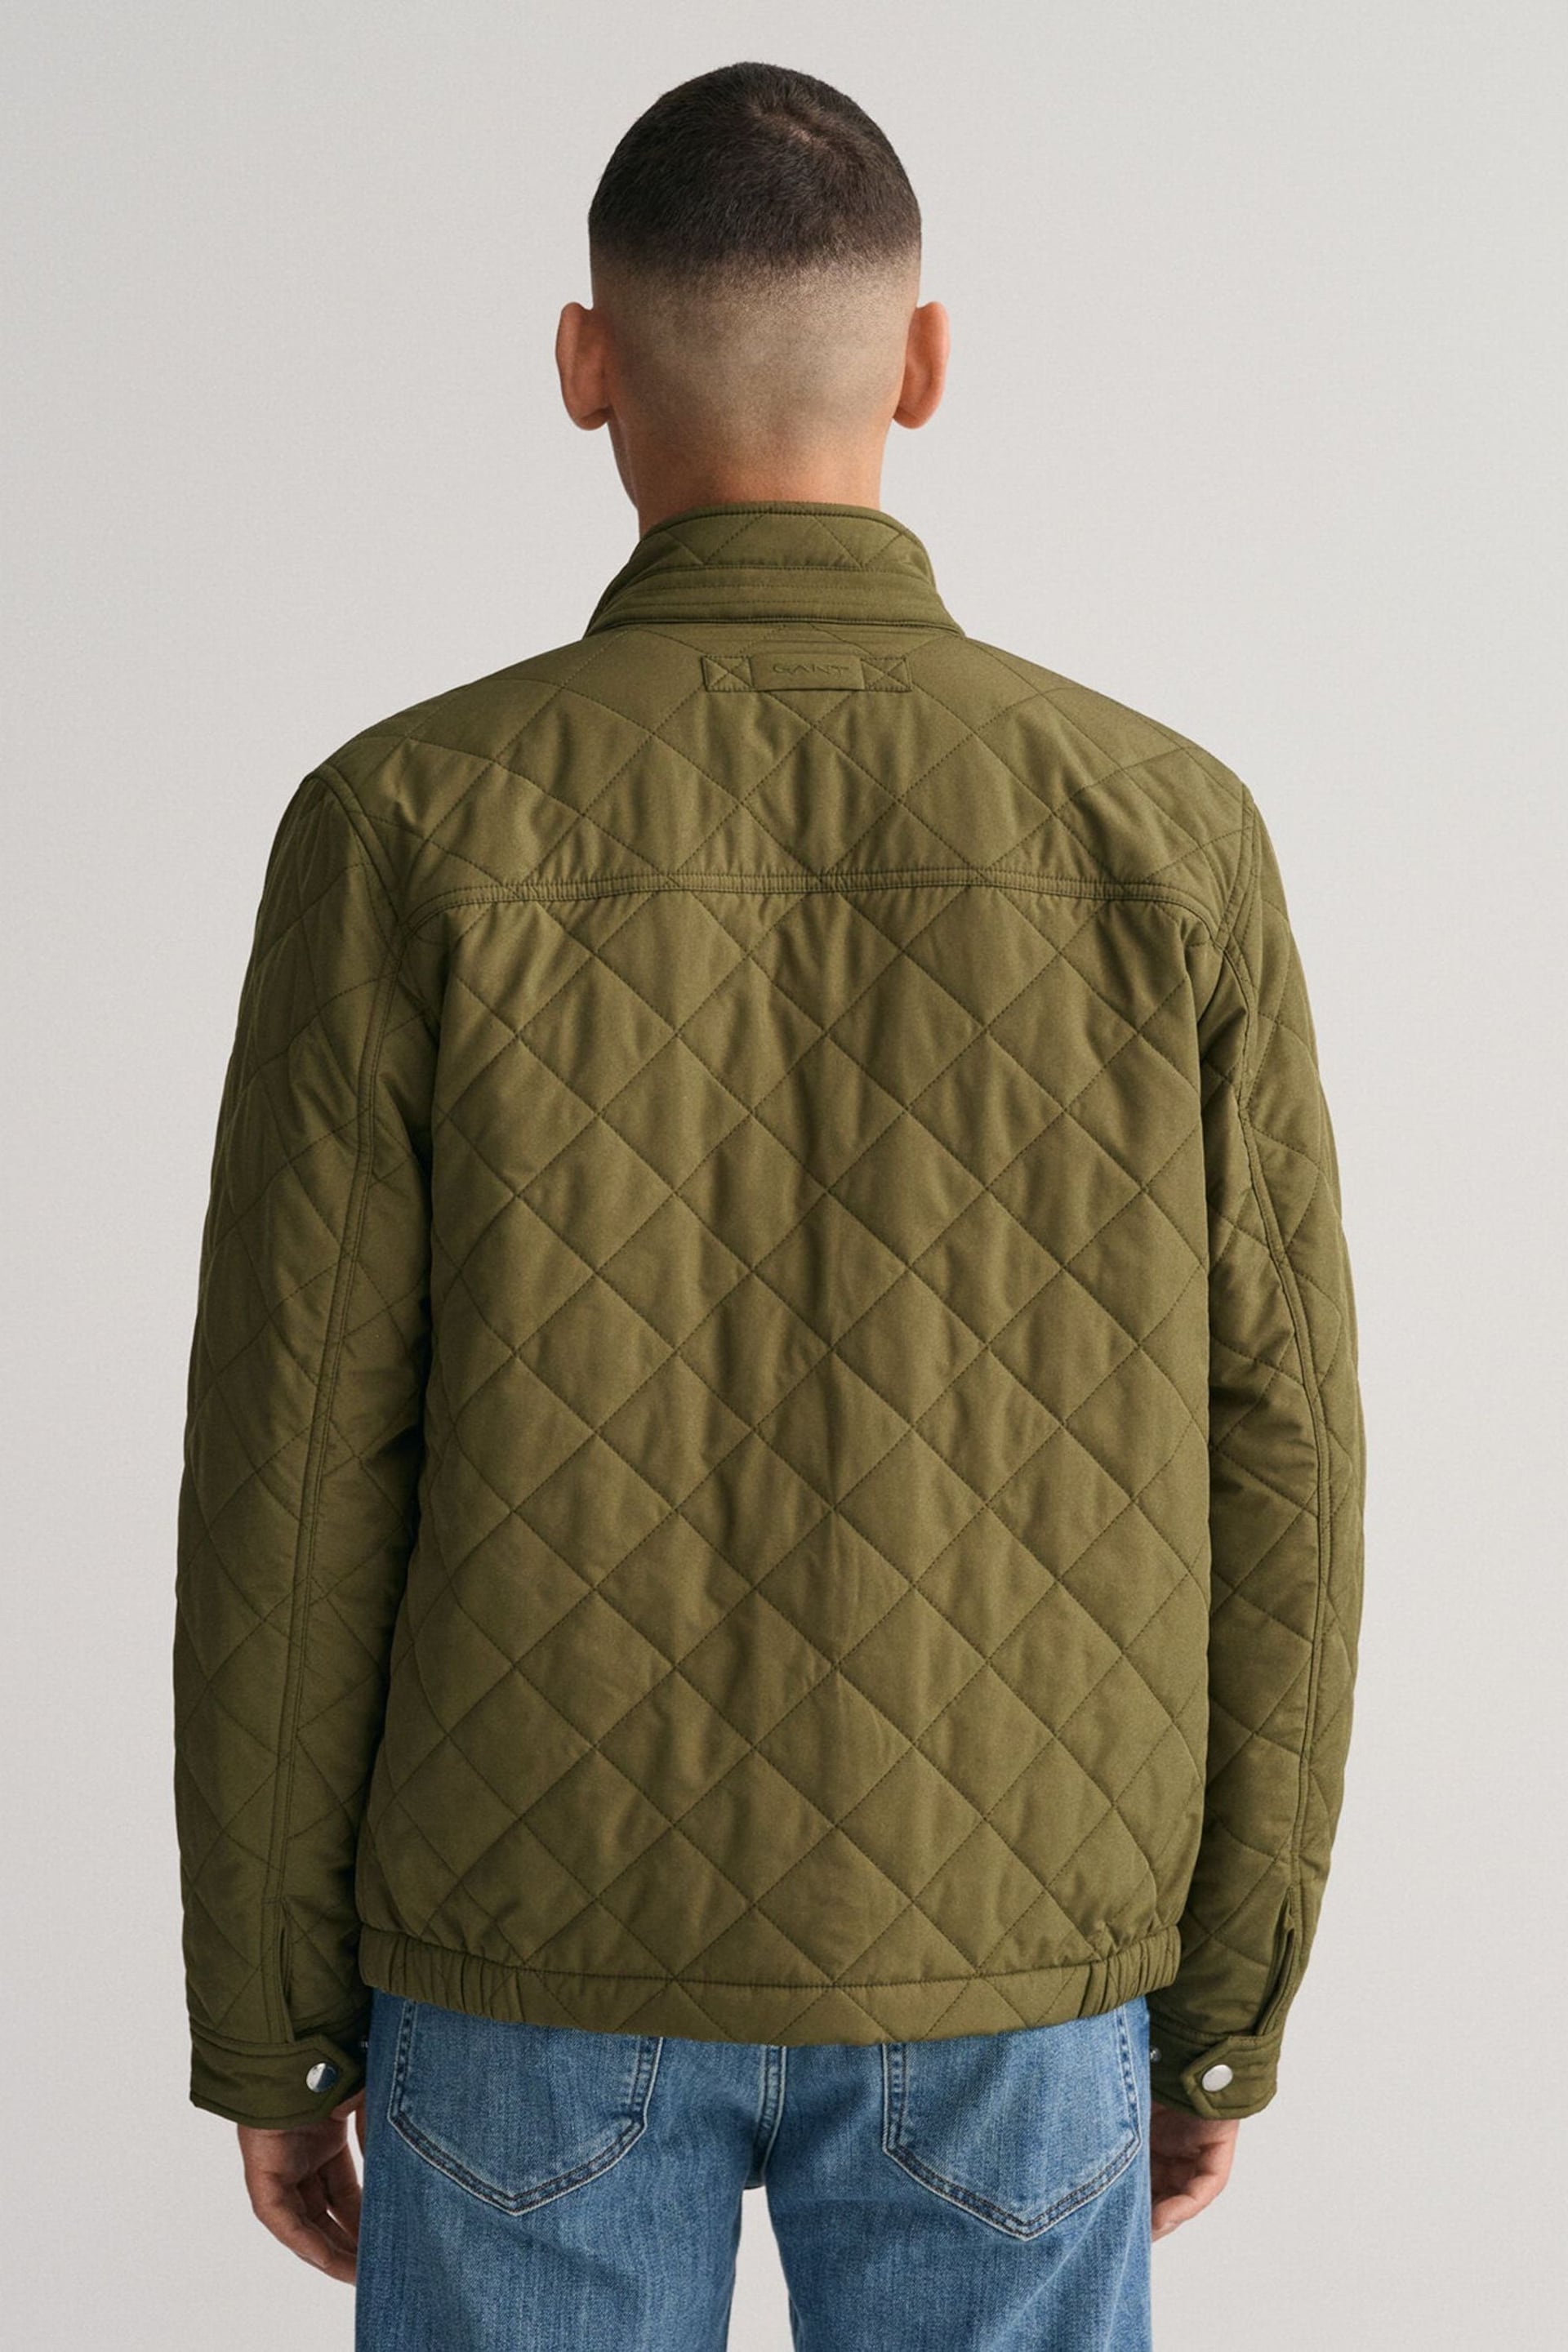 GANT Green Quilted Windcheater Jacket - Image 2 of 6